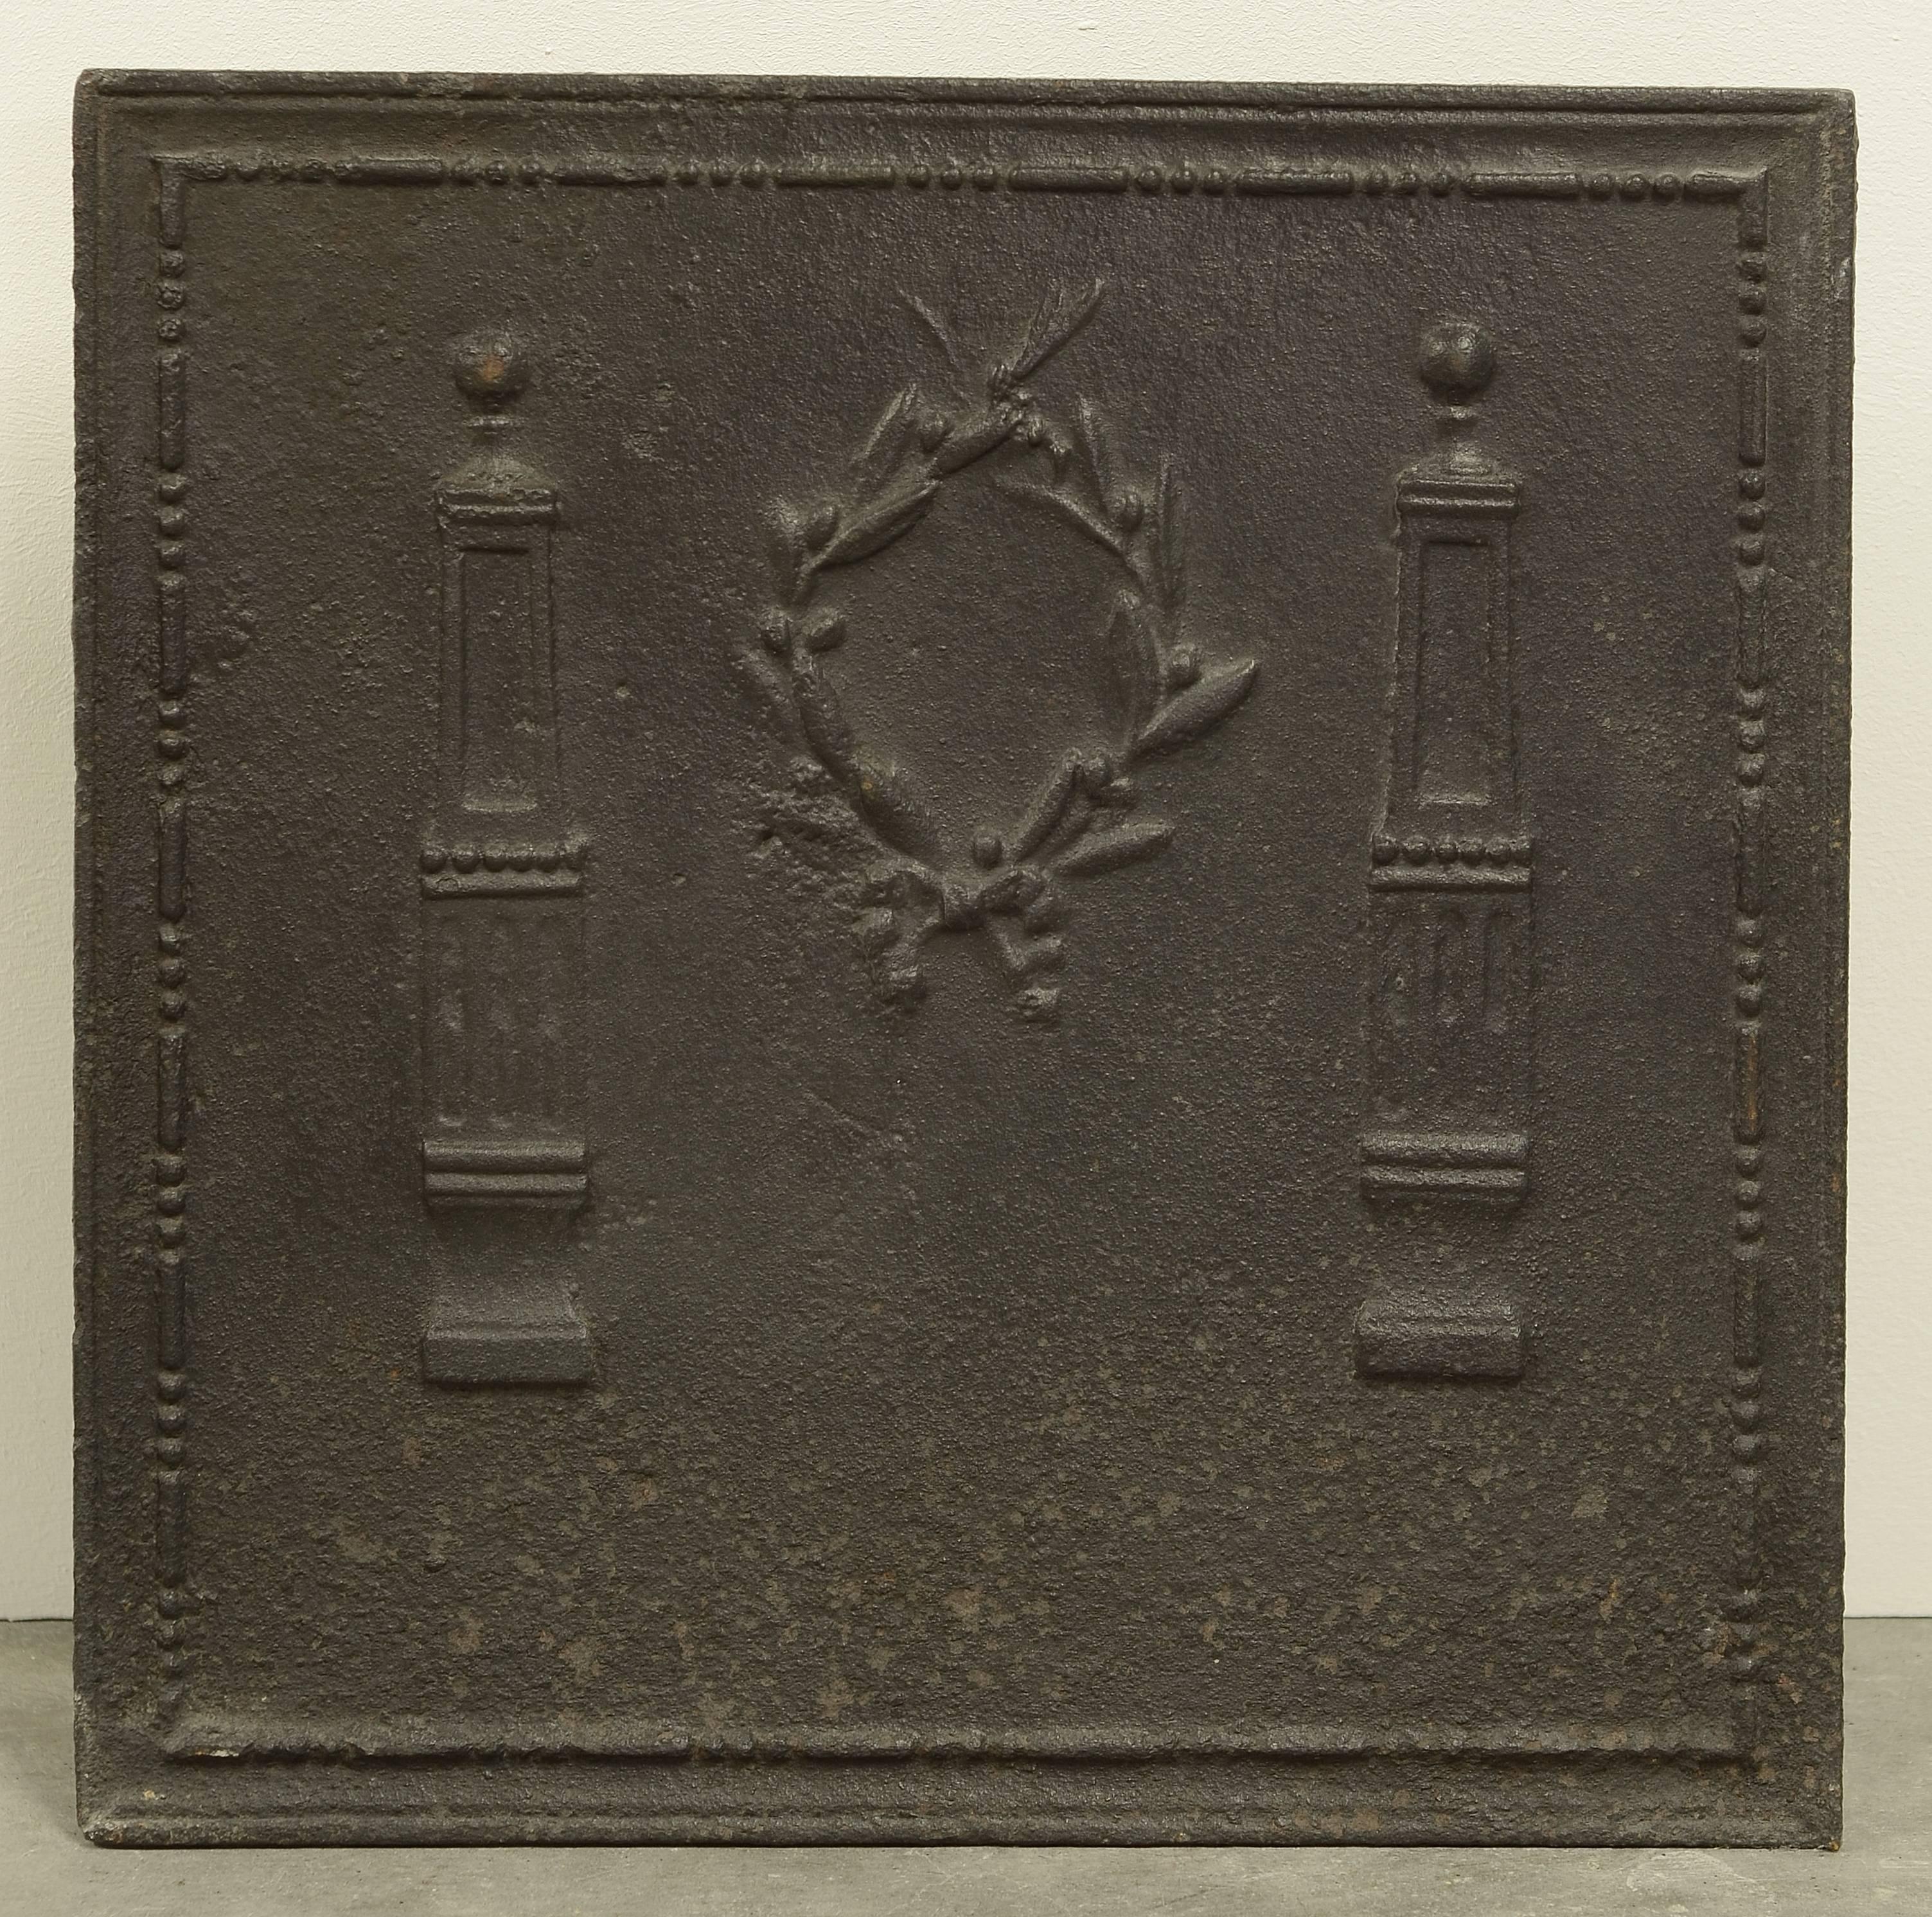 Small square antique fireback with Laurel Wreath between Pillars, 19th century.

Great usable dimensions.
Excellent condition, can be used in a fire or as backsplash.

Can be supplied with stand.